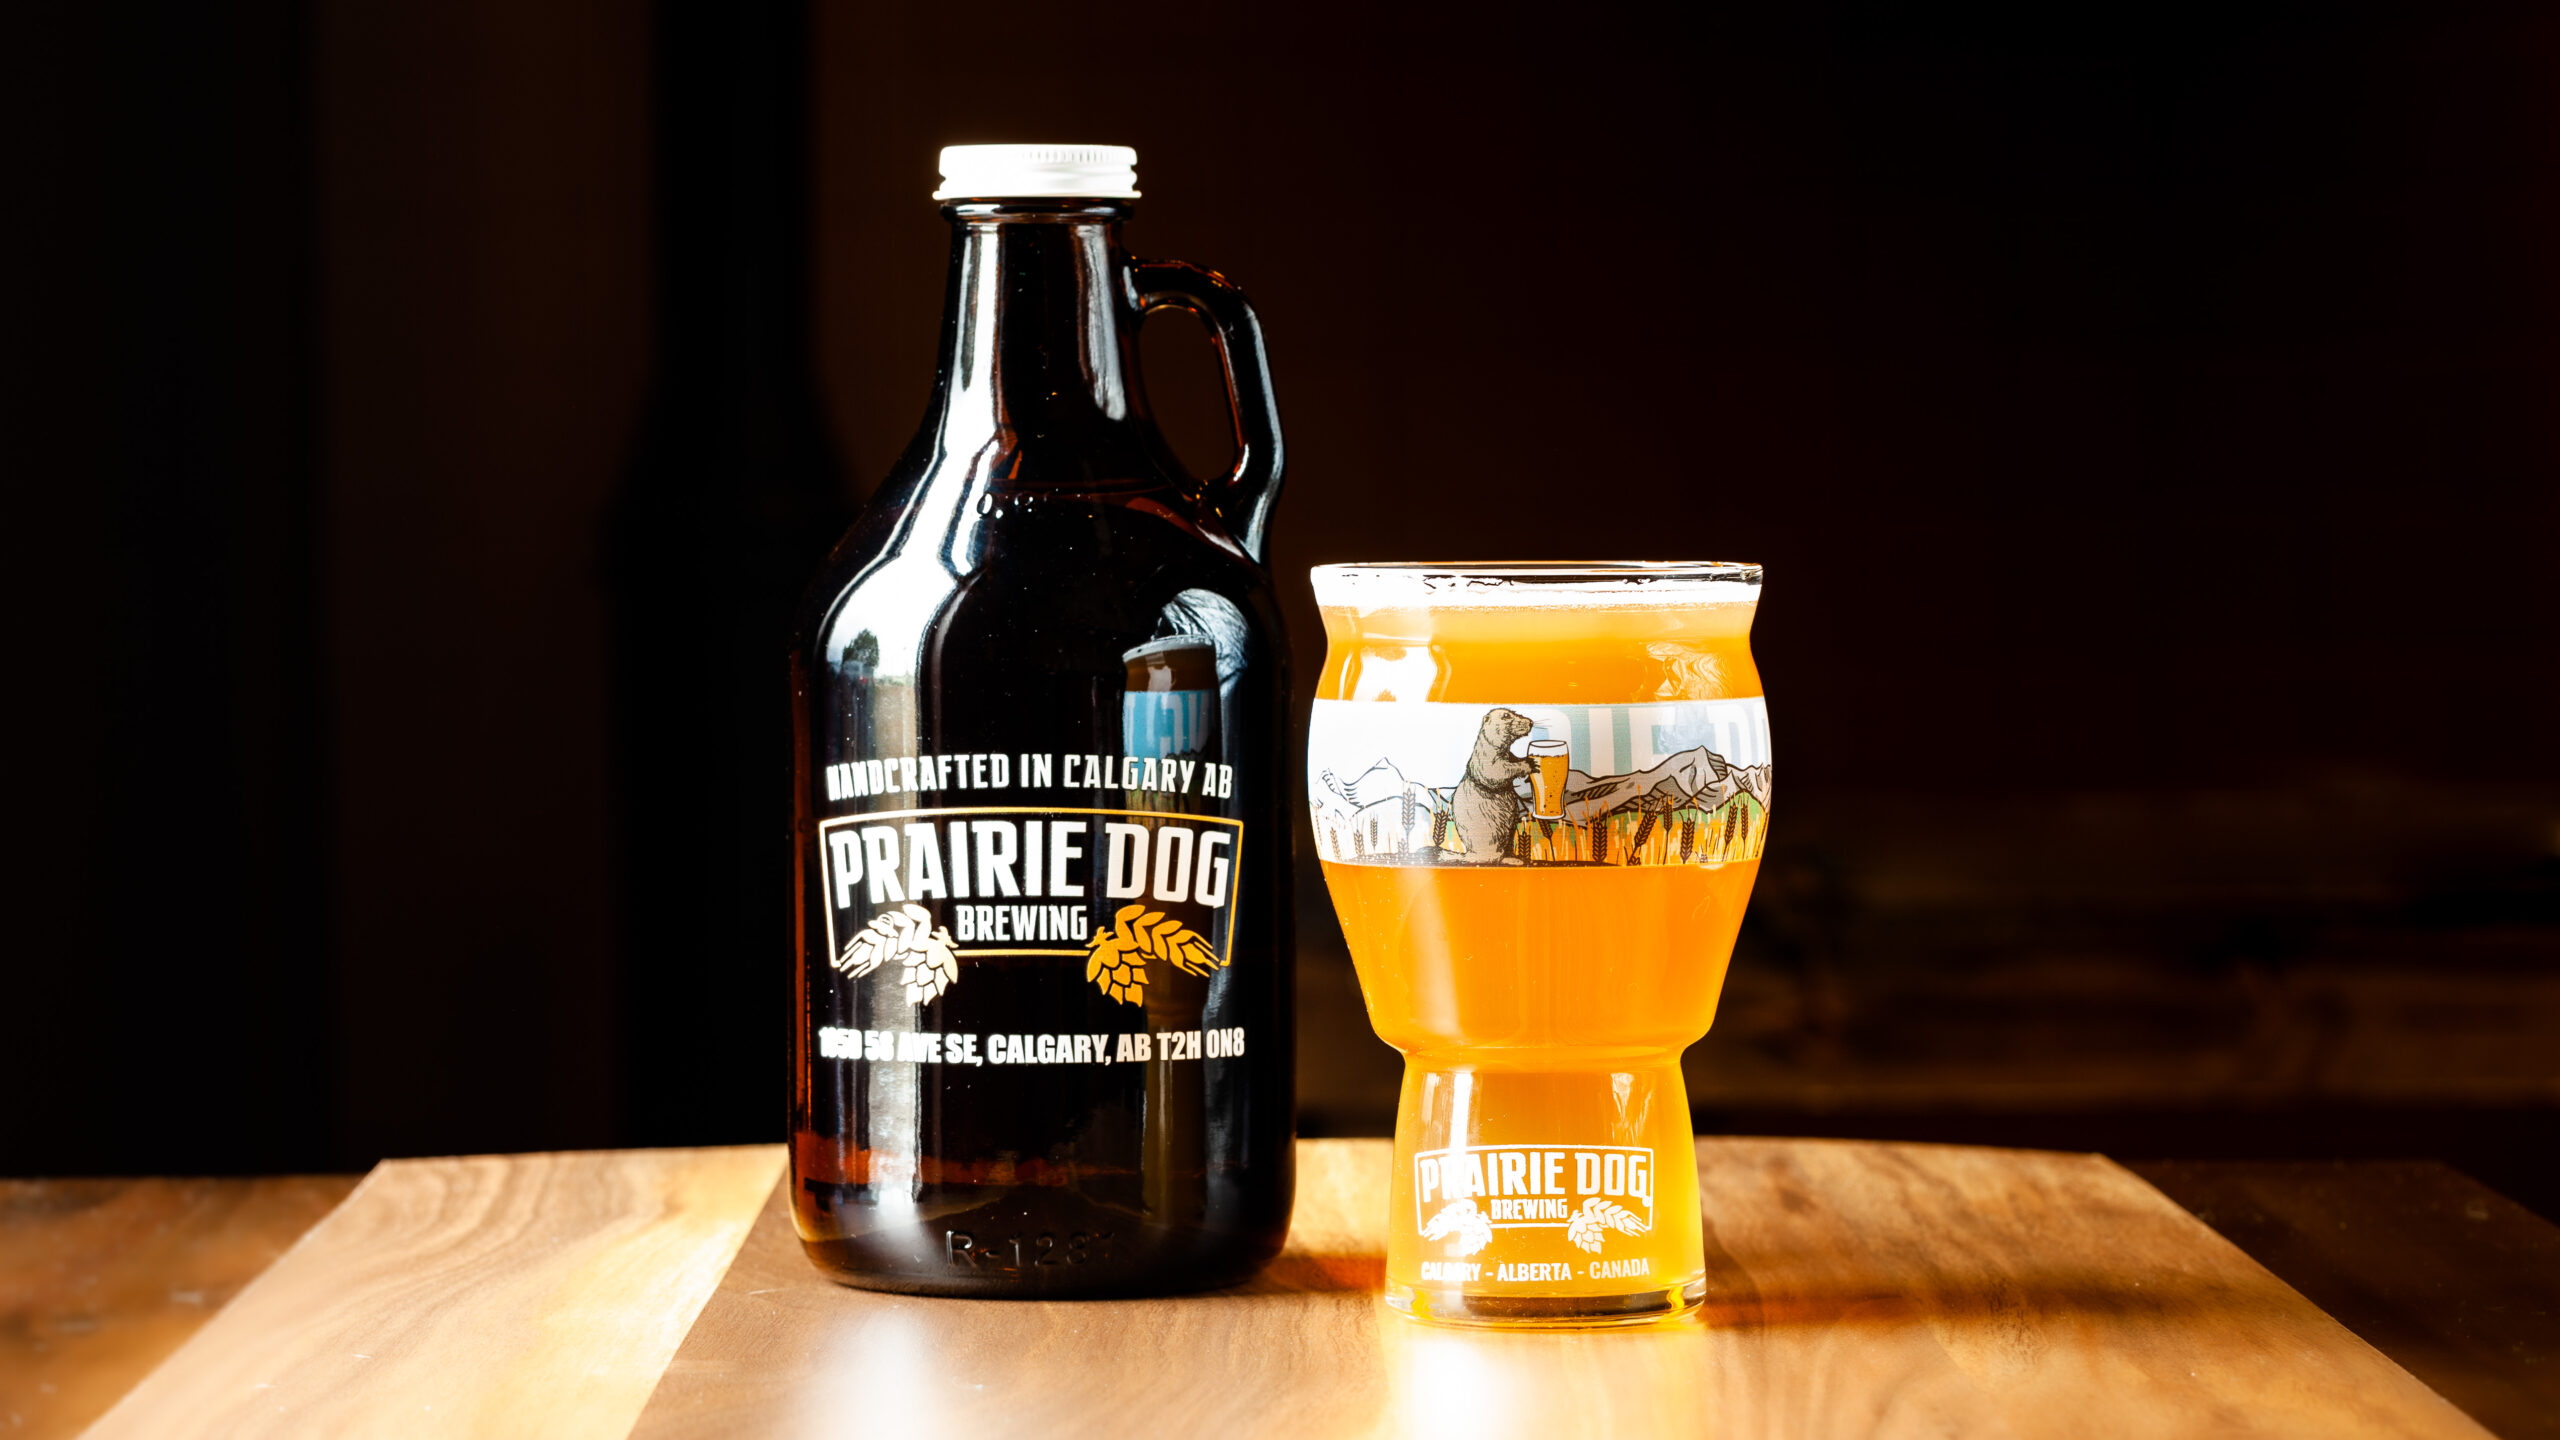 A 946mL howler jug of Prairie Dog Brewing Kettle Sour Gone Wild! with a 473mL draft pour in a branded beer glass.